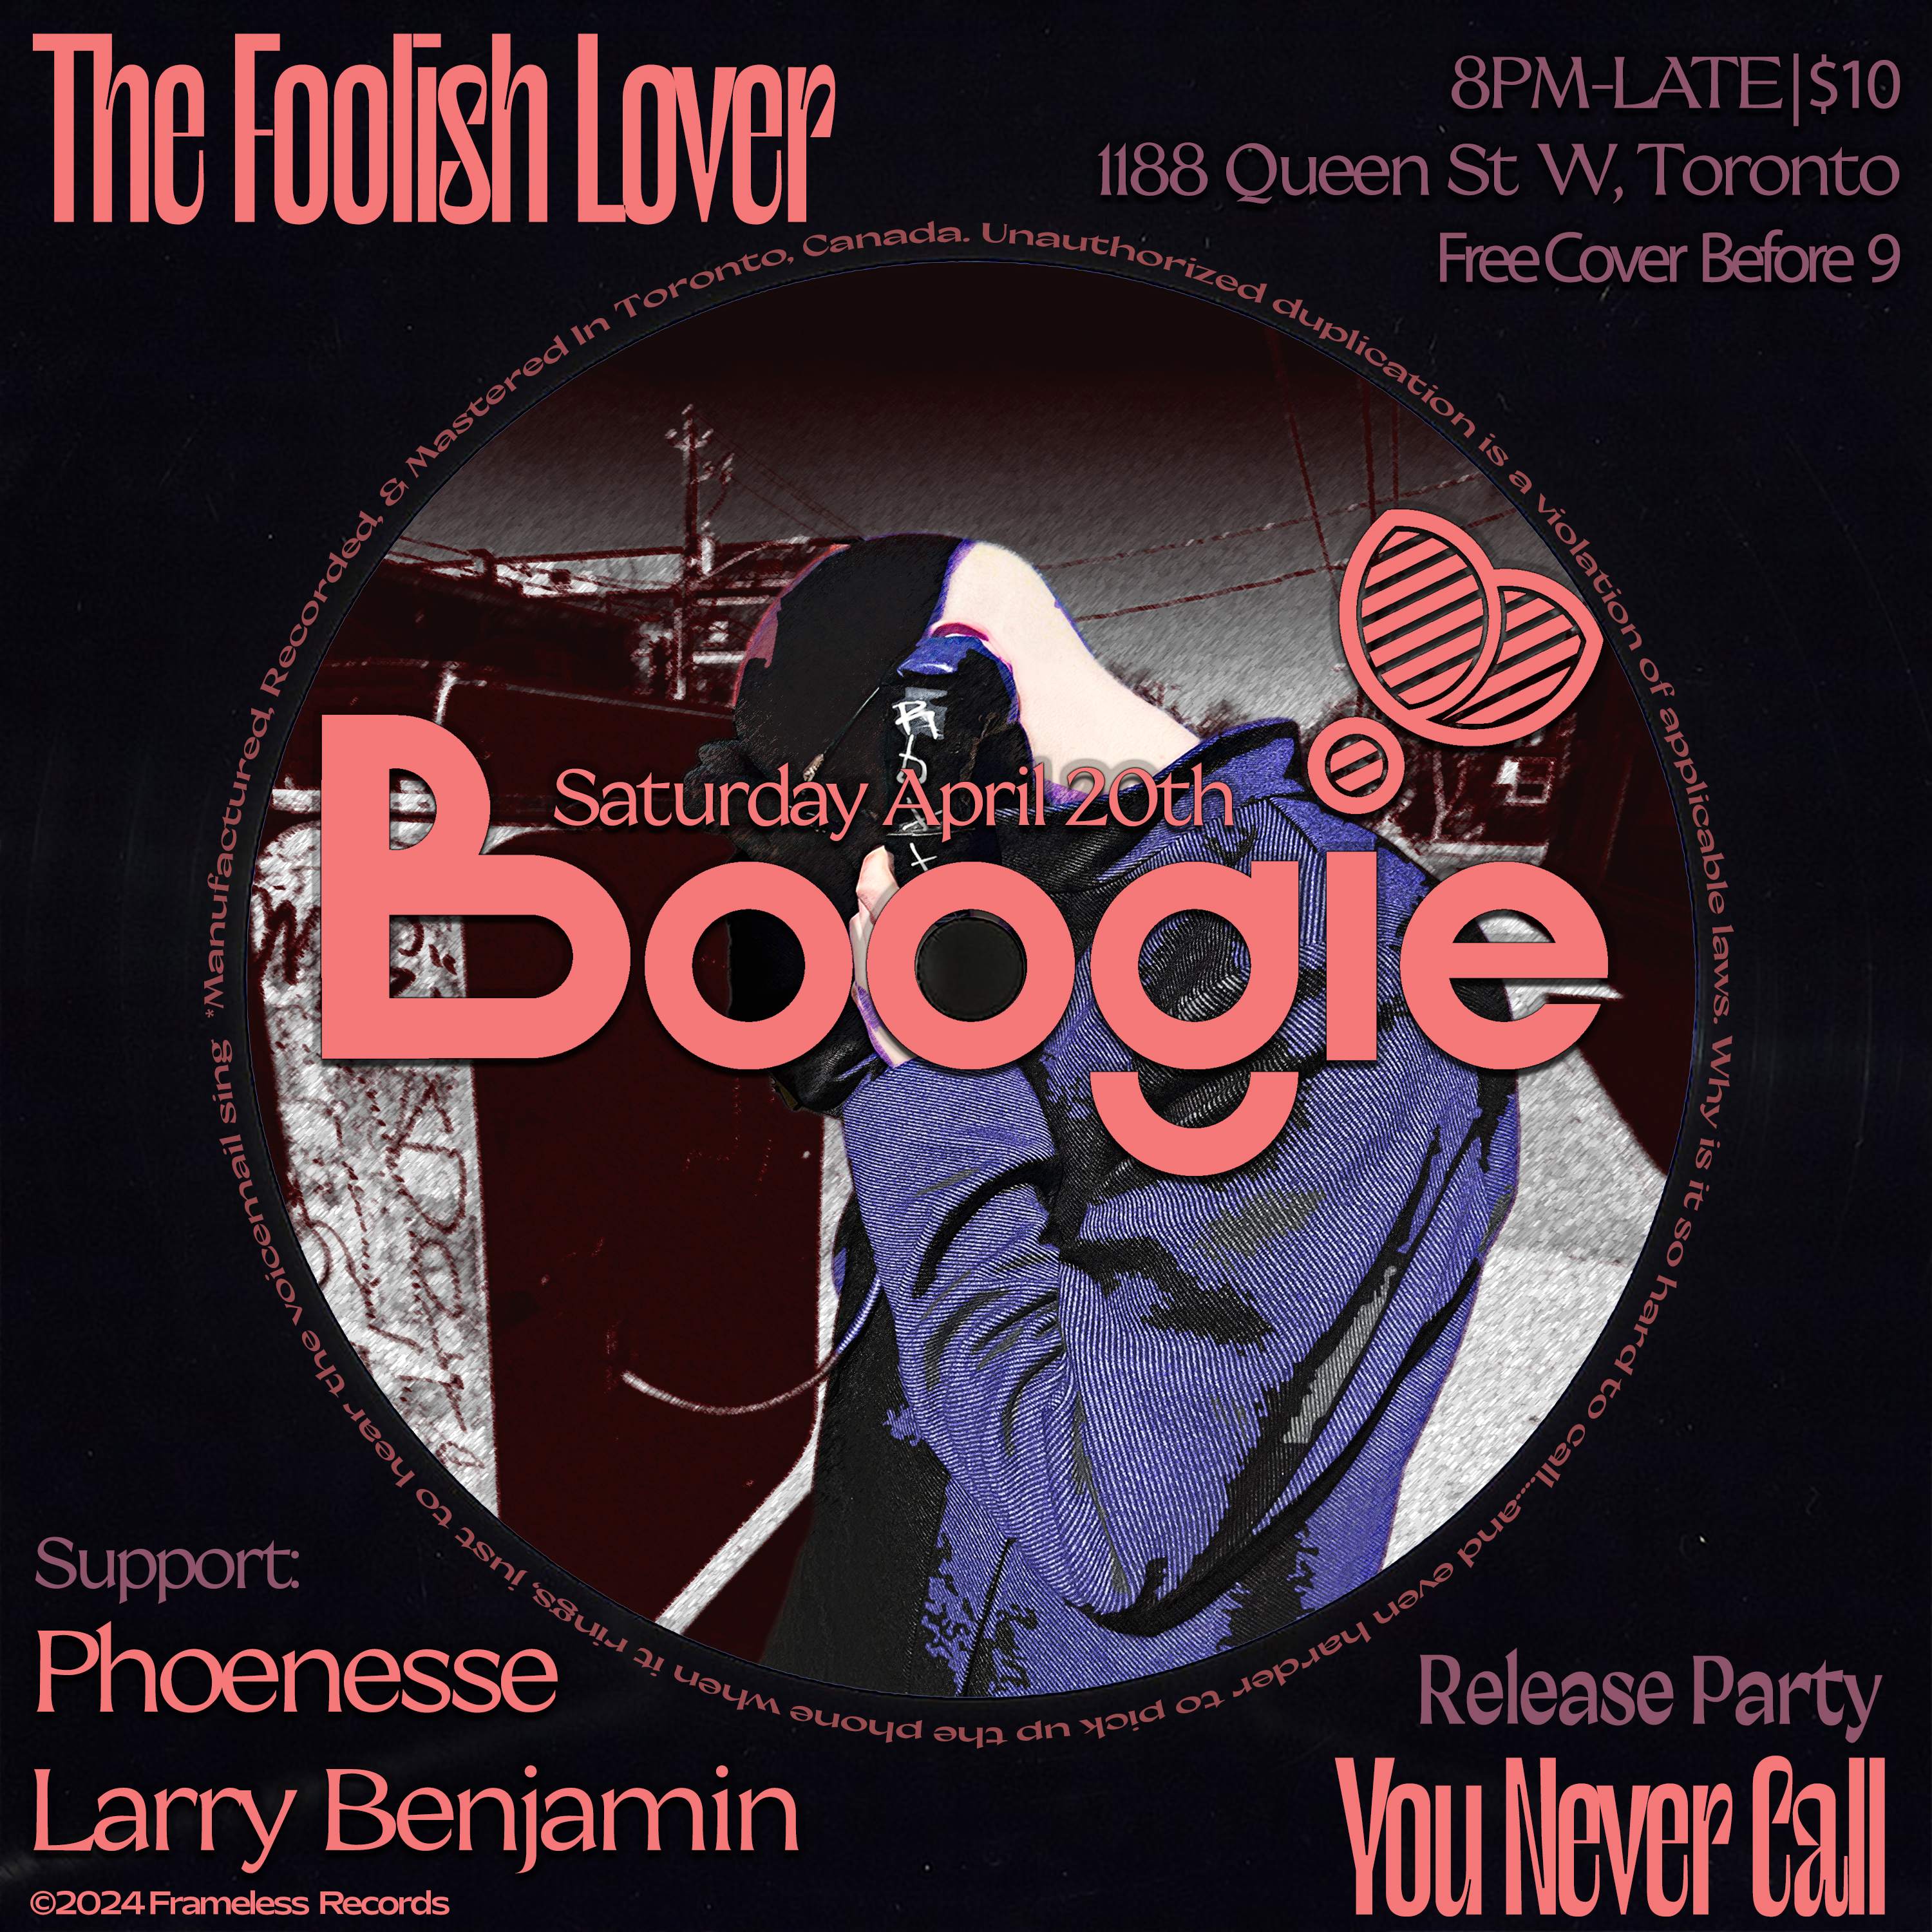 The Foolish Lover - 'You Never Call' Release Party - Página frontal